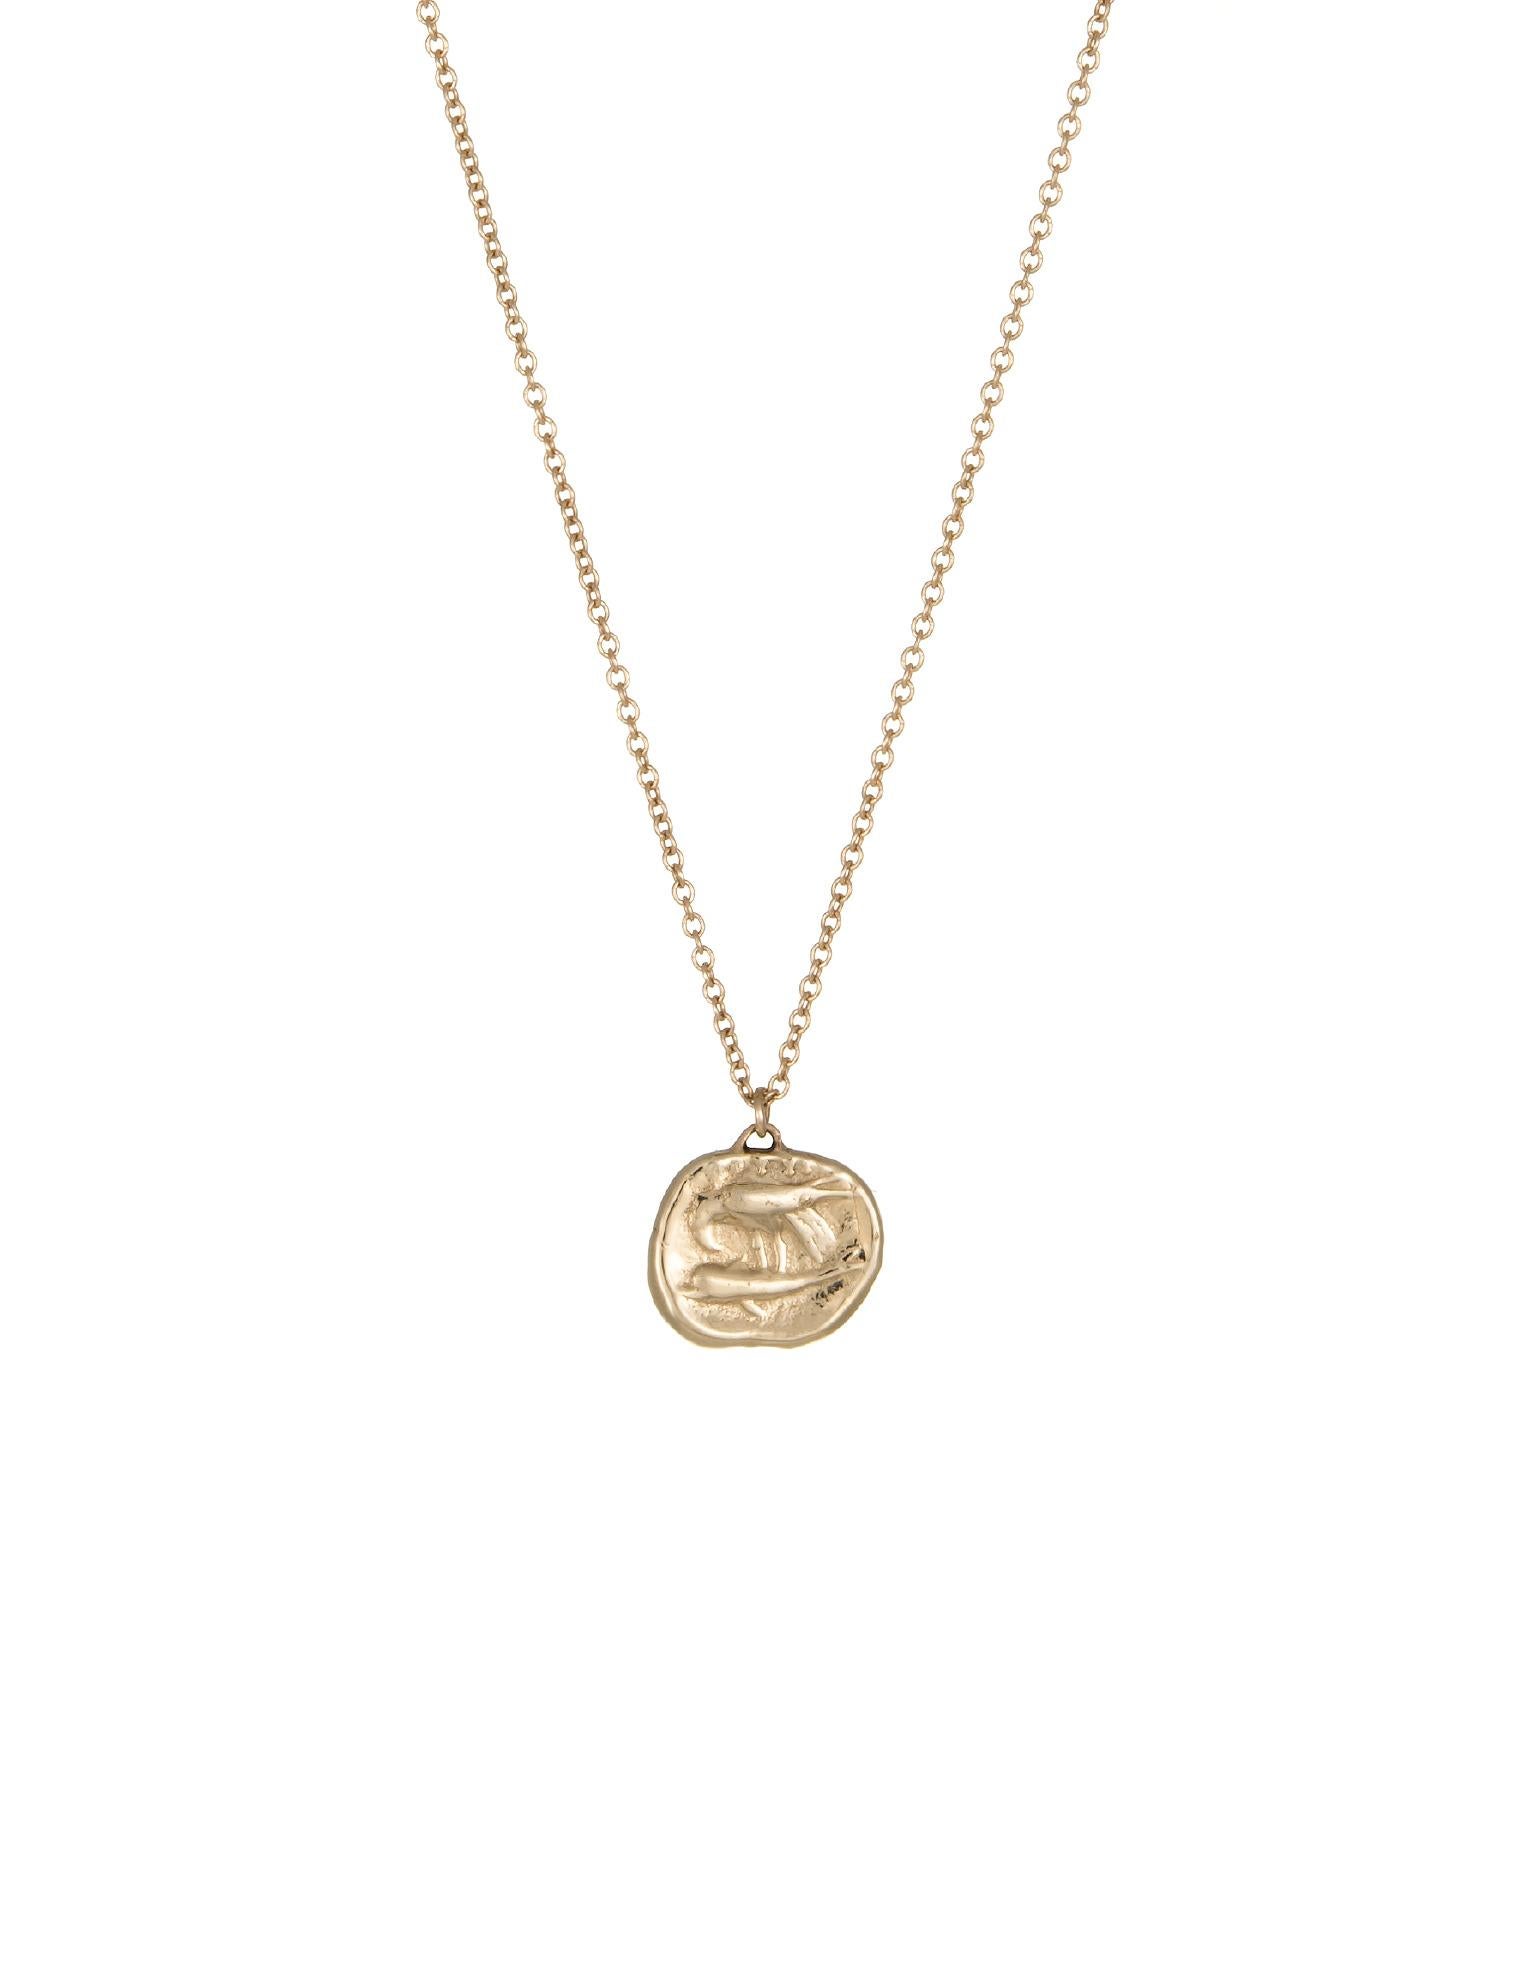 Our Gemini pendant in 14k gold. Molded from an ancient Greek coin. In Greek Myth, Castor and Pollux (sons of Zeus and Leda) were known as the Gemini. They protected travelers and sailors, and were known to intervene during times of crisis. Opposite